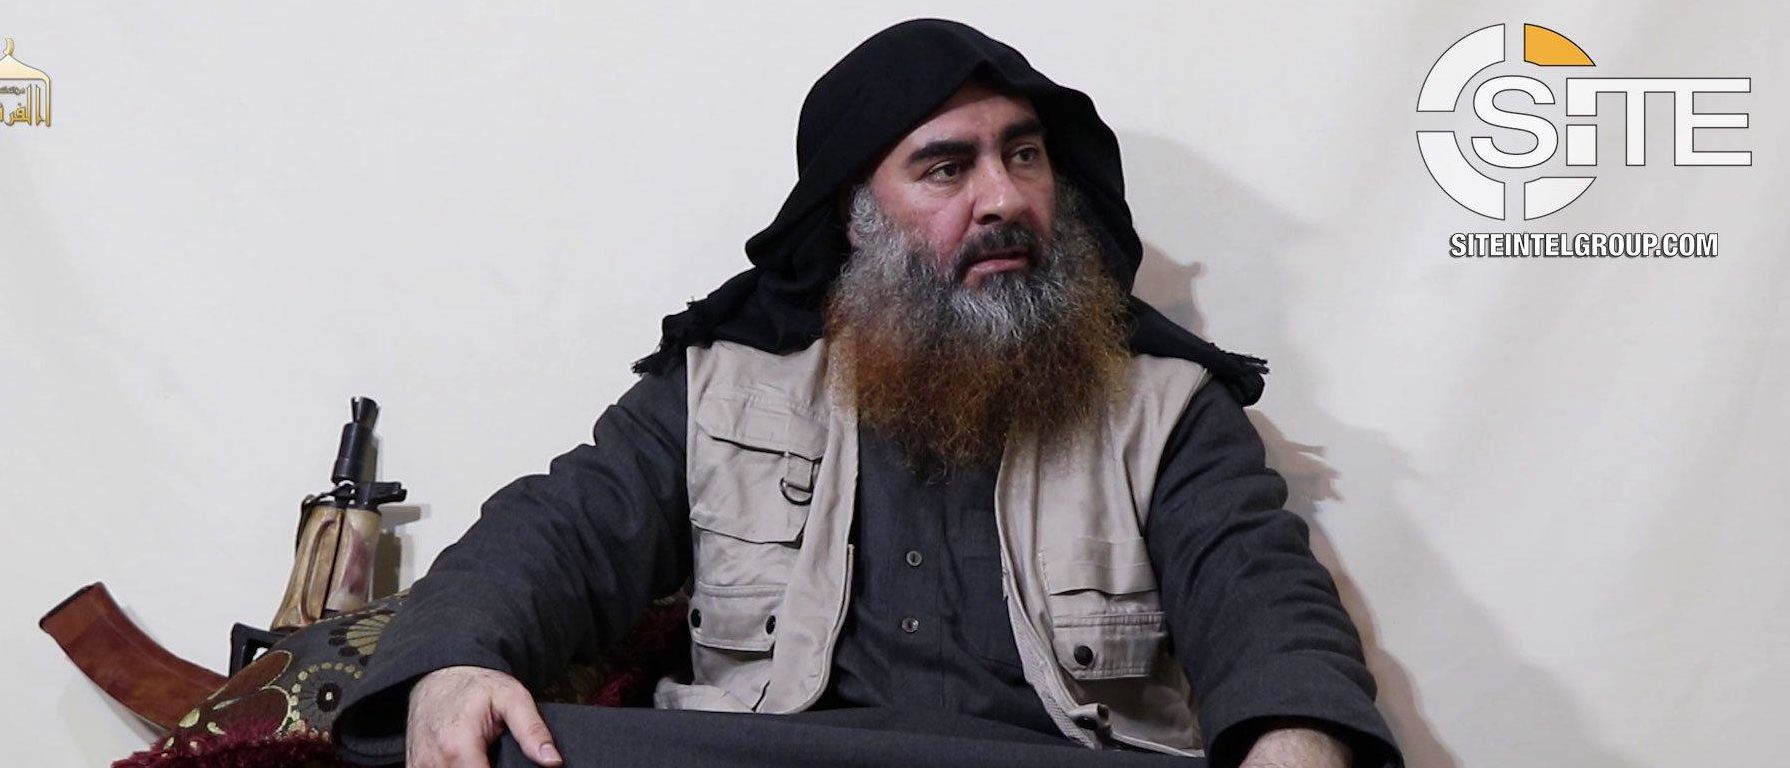 ISIS' Furqan issues new video showing leader Abu Bakr al-Baghdadi, Photo courtesy of SITE Intelligence Group